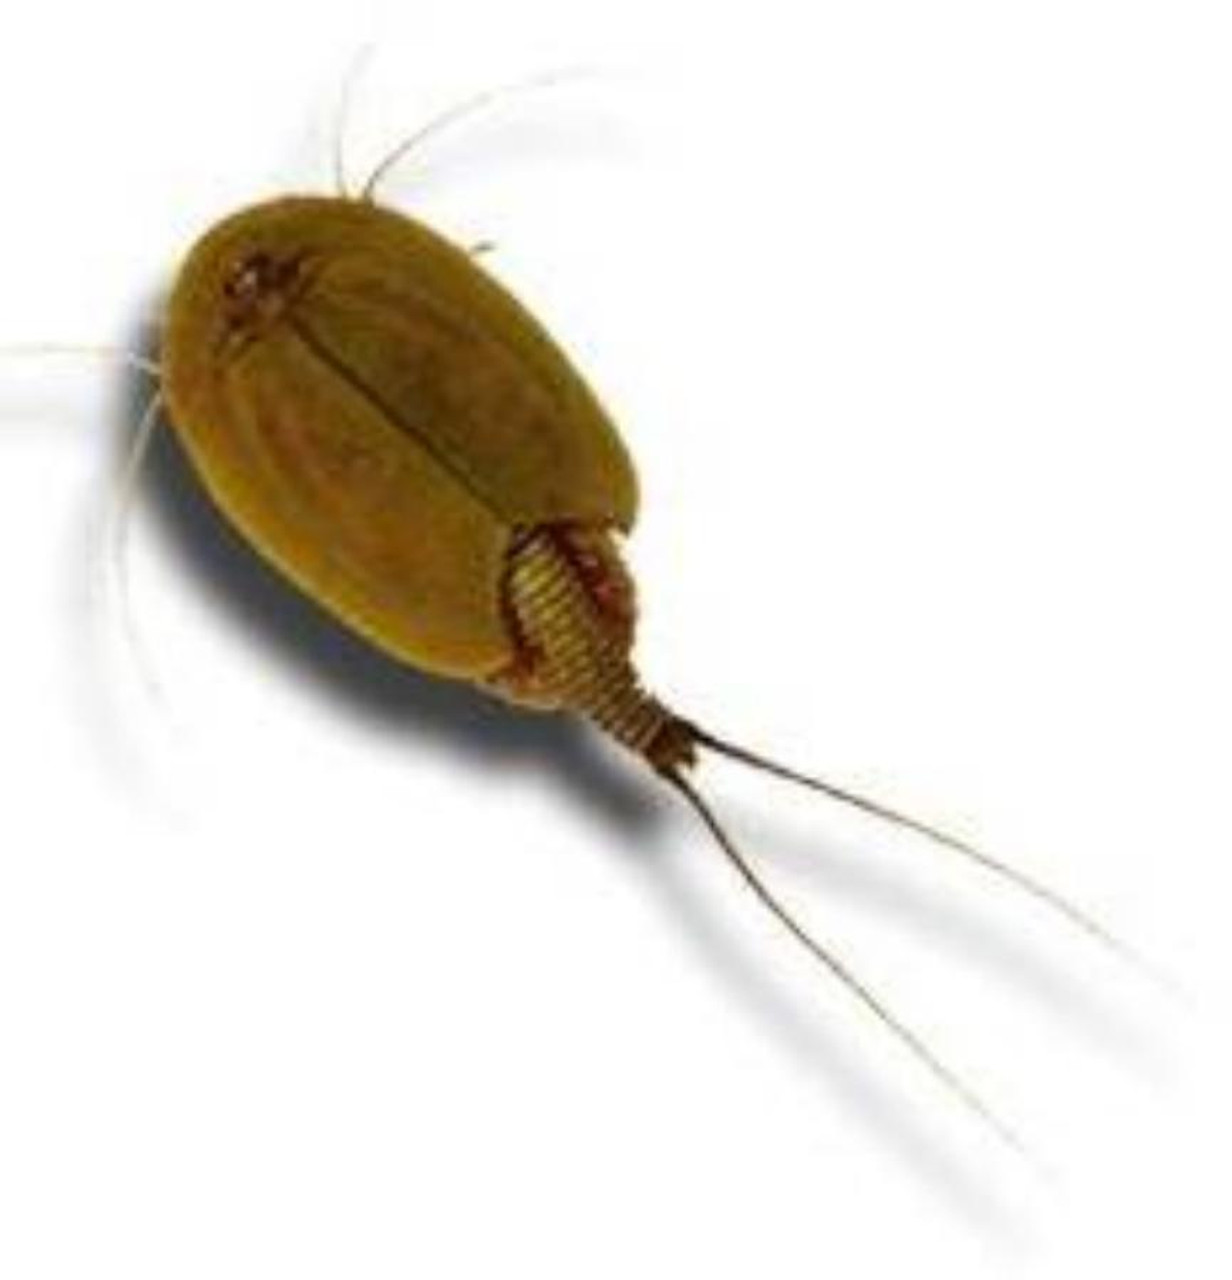 TRIASSIC TRIOPS – Science World Science Store